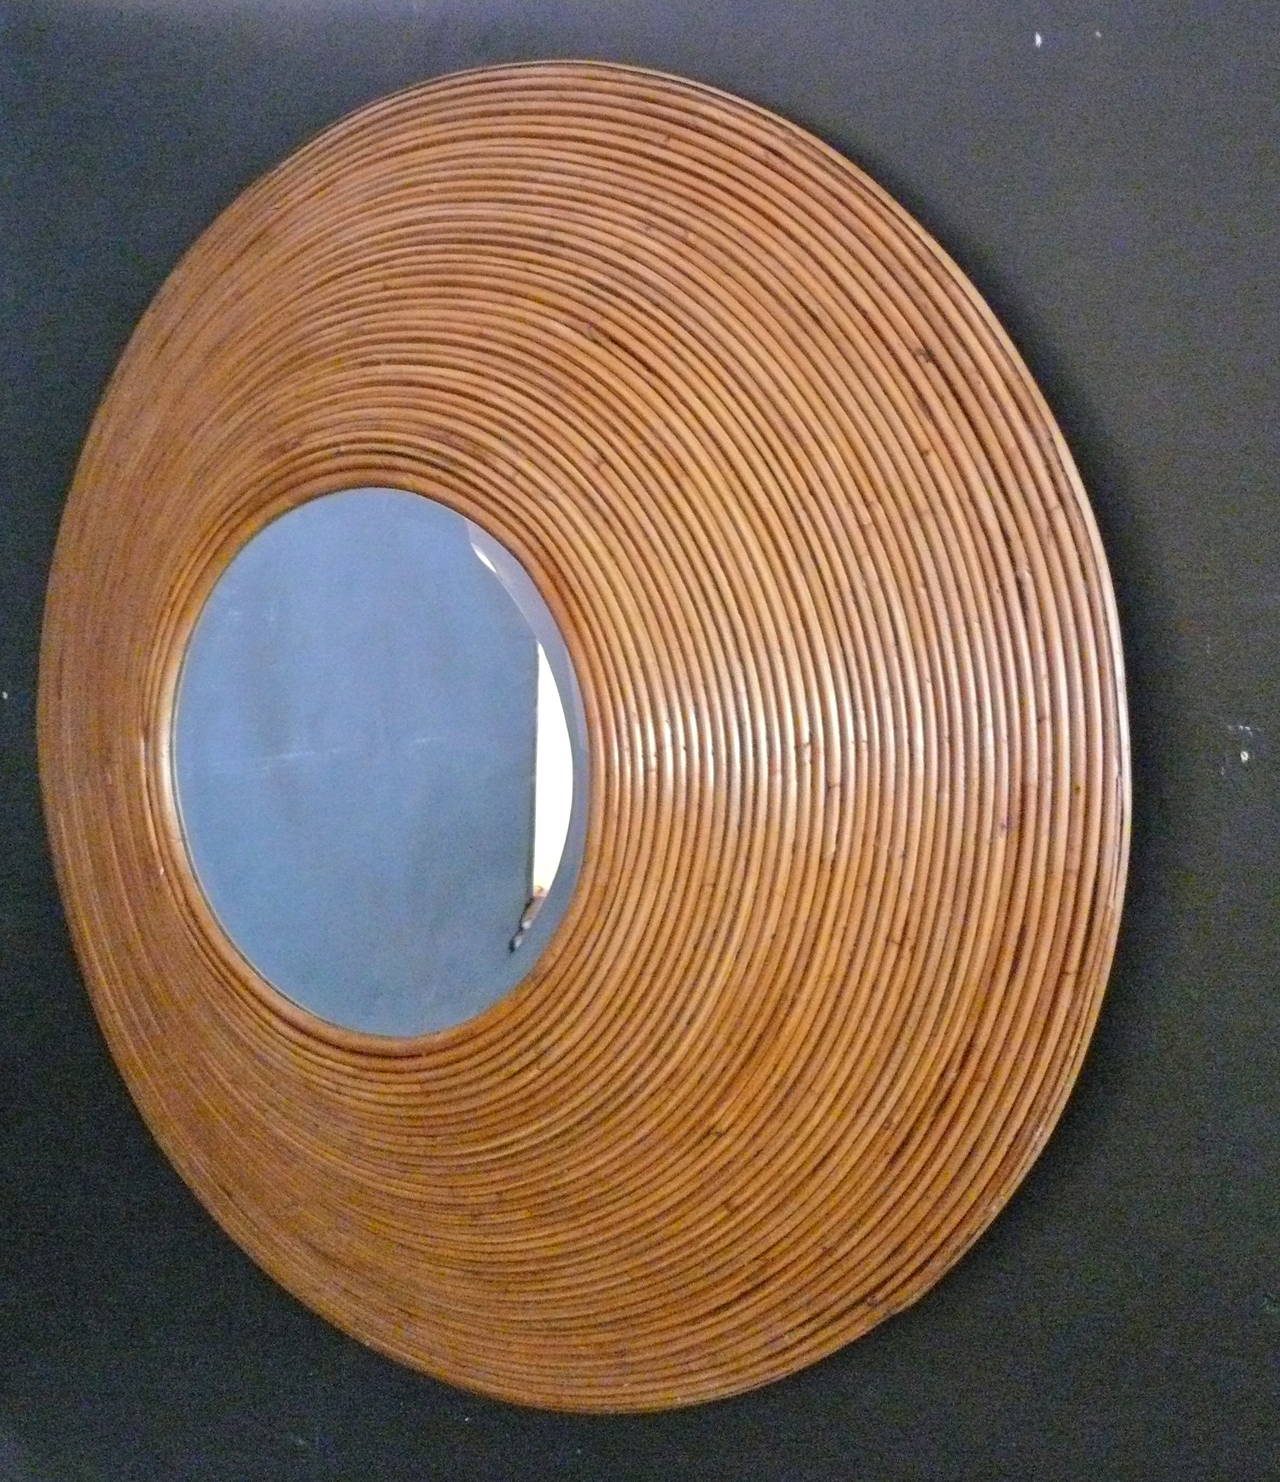 Fantastic large-scale rattan mirror. Rattan in very good condition. Perfect for a hallway or bathroom.